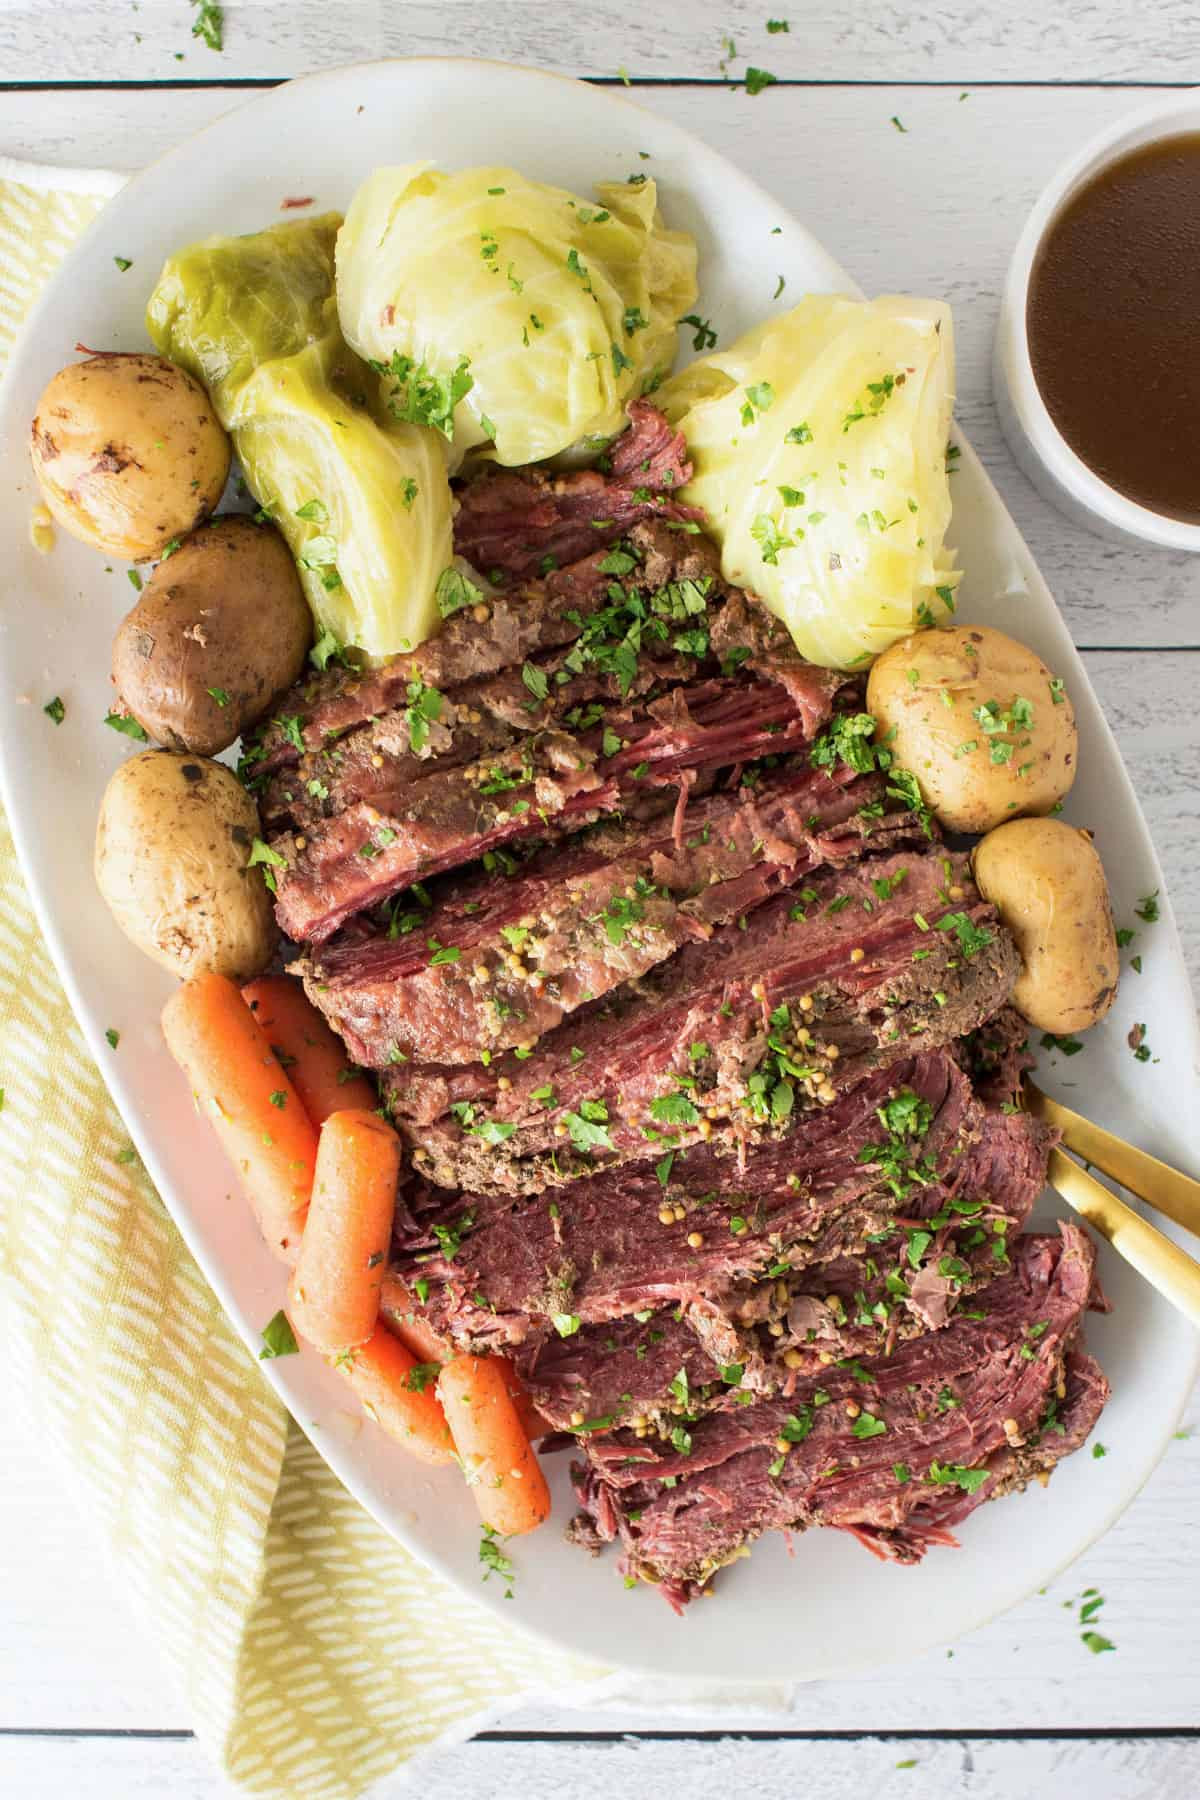 Corned Beef And Cabbage In Instant Pot
 Instant Pot Corned Beef and Cabbage